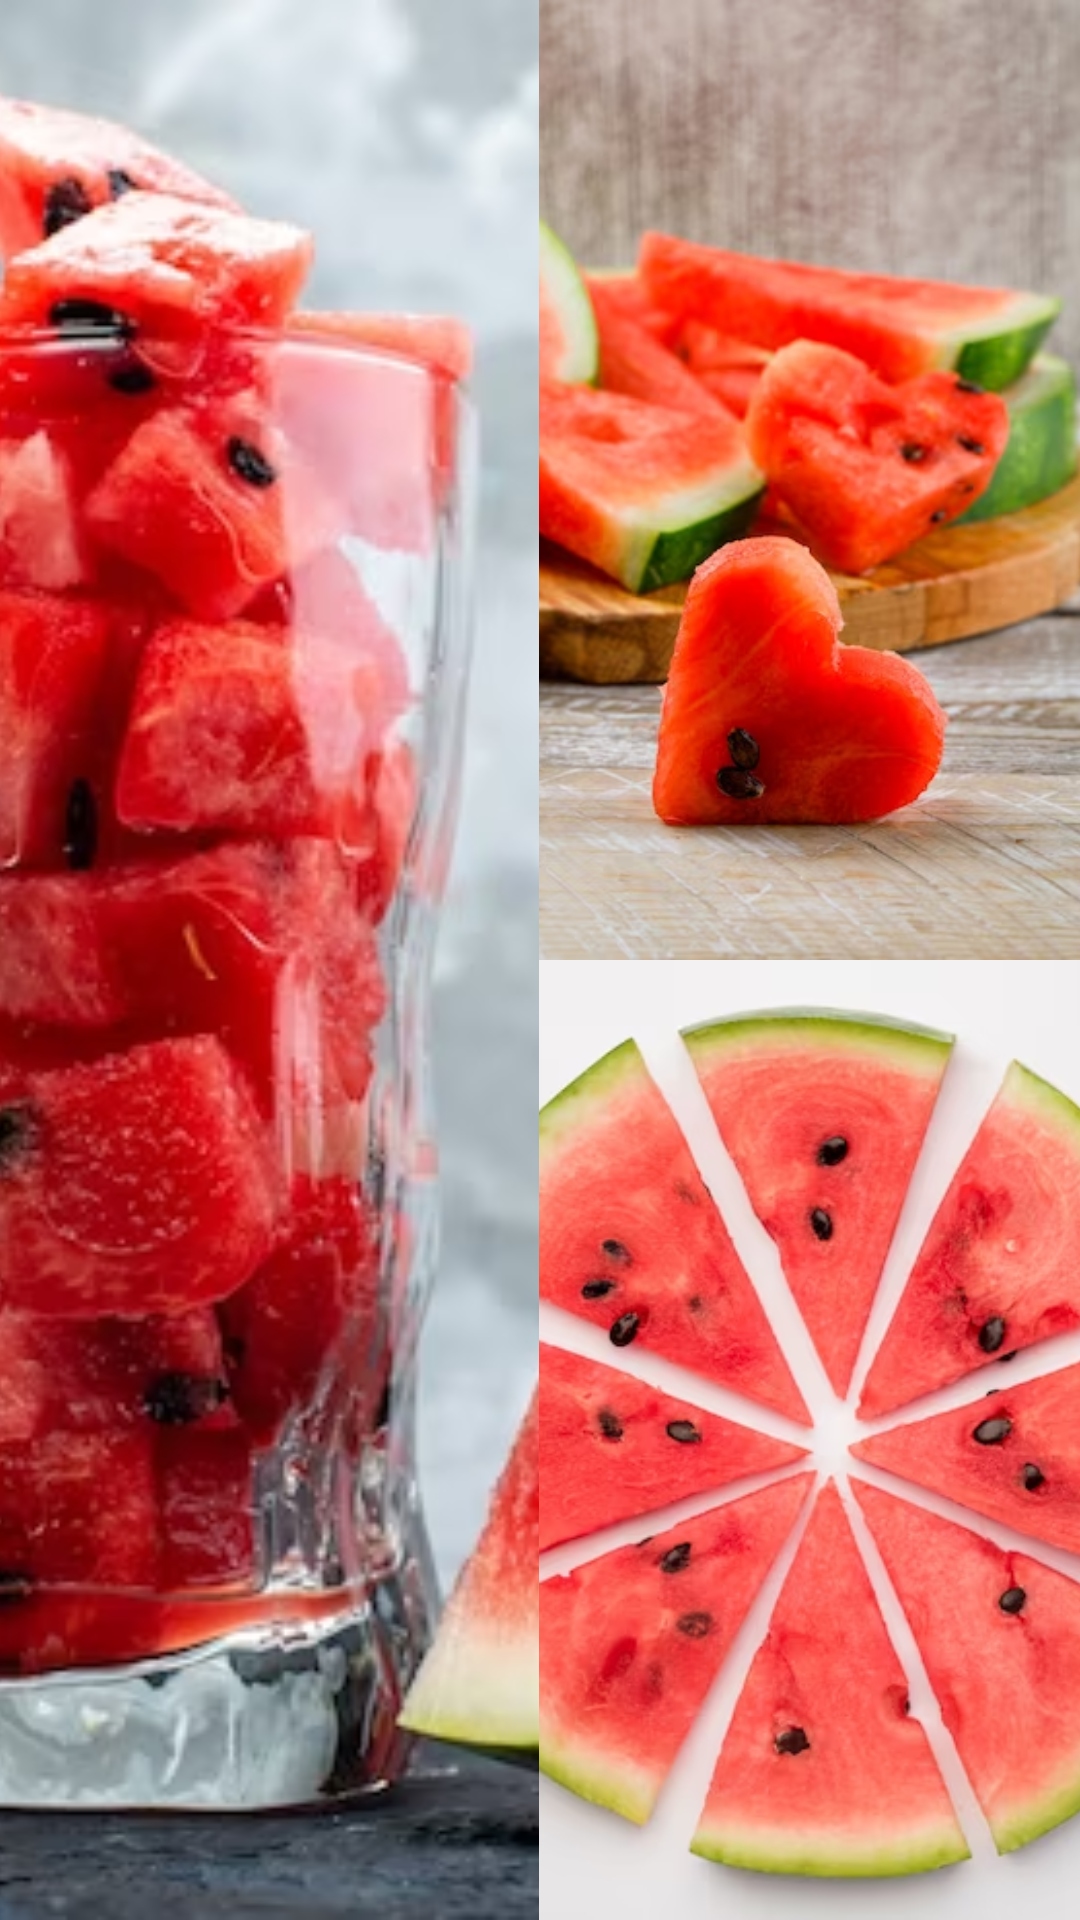 Obsessed with watermelons this season? Know amazing health facts and benefits